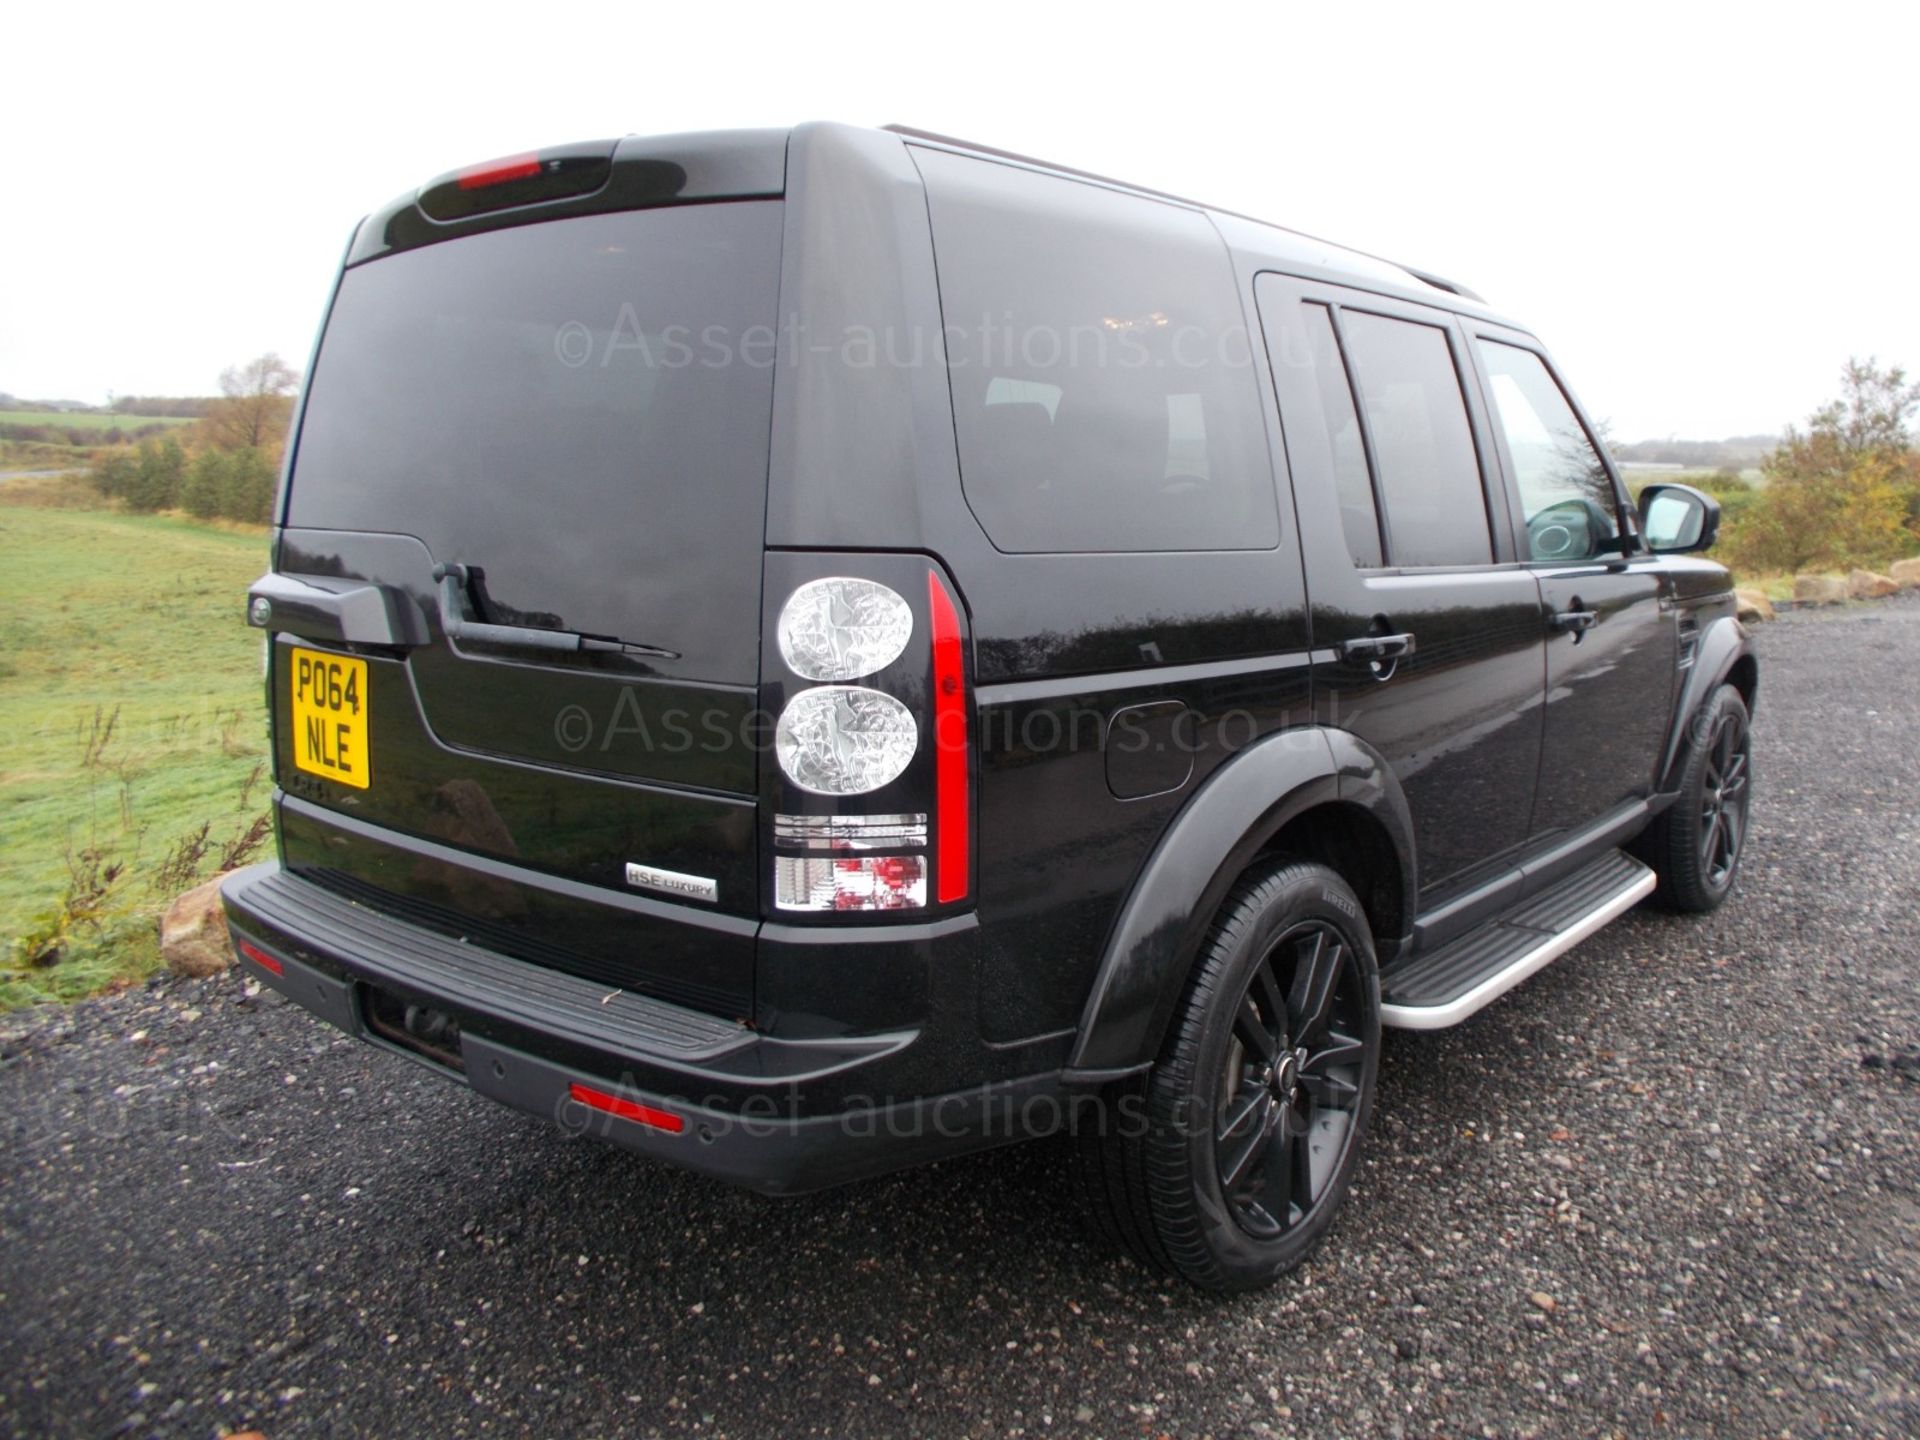 2015/64 LAND ROVER DISCOVERY HSE LUXURY SCV6 7 SEATER, 3.0 V6 PETROL SUPERCHARGED *PLUS VAT* - Image 7 of 28